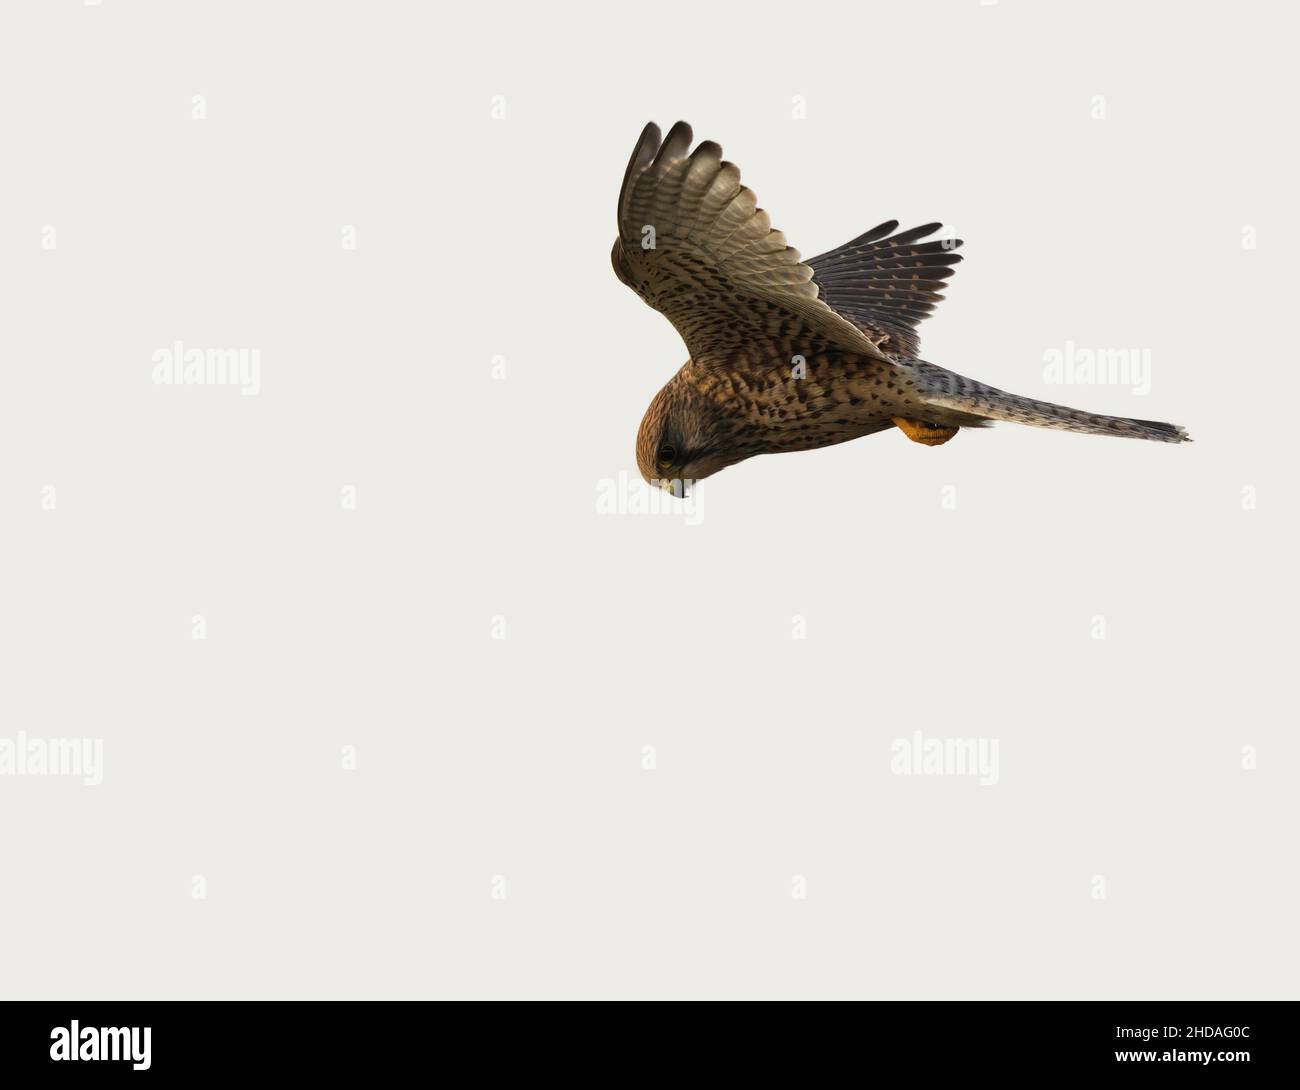 kestrel in flight hovering with plain background Stock Photo